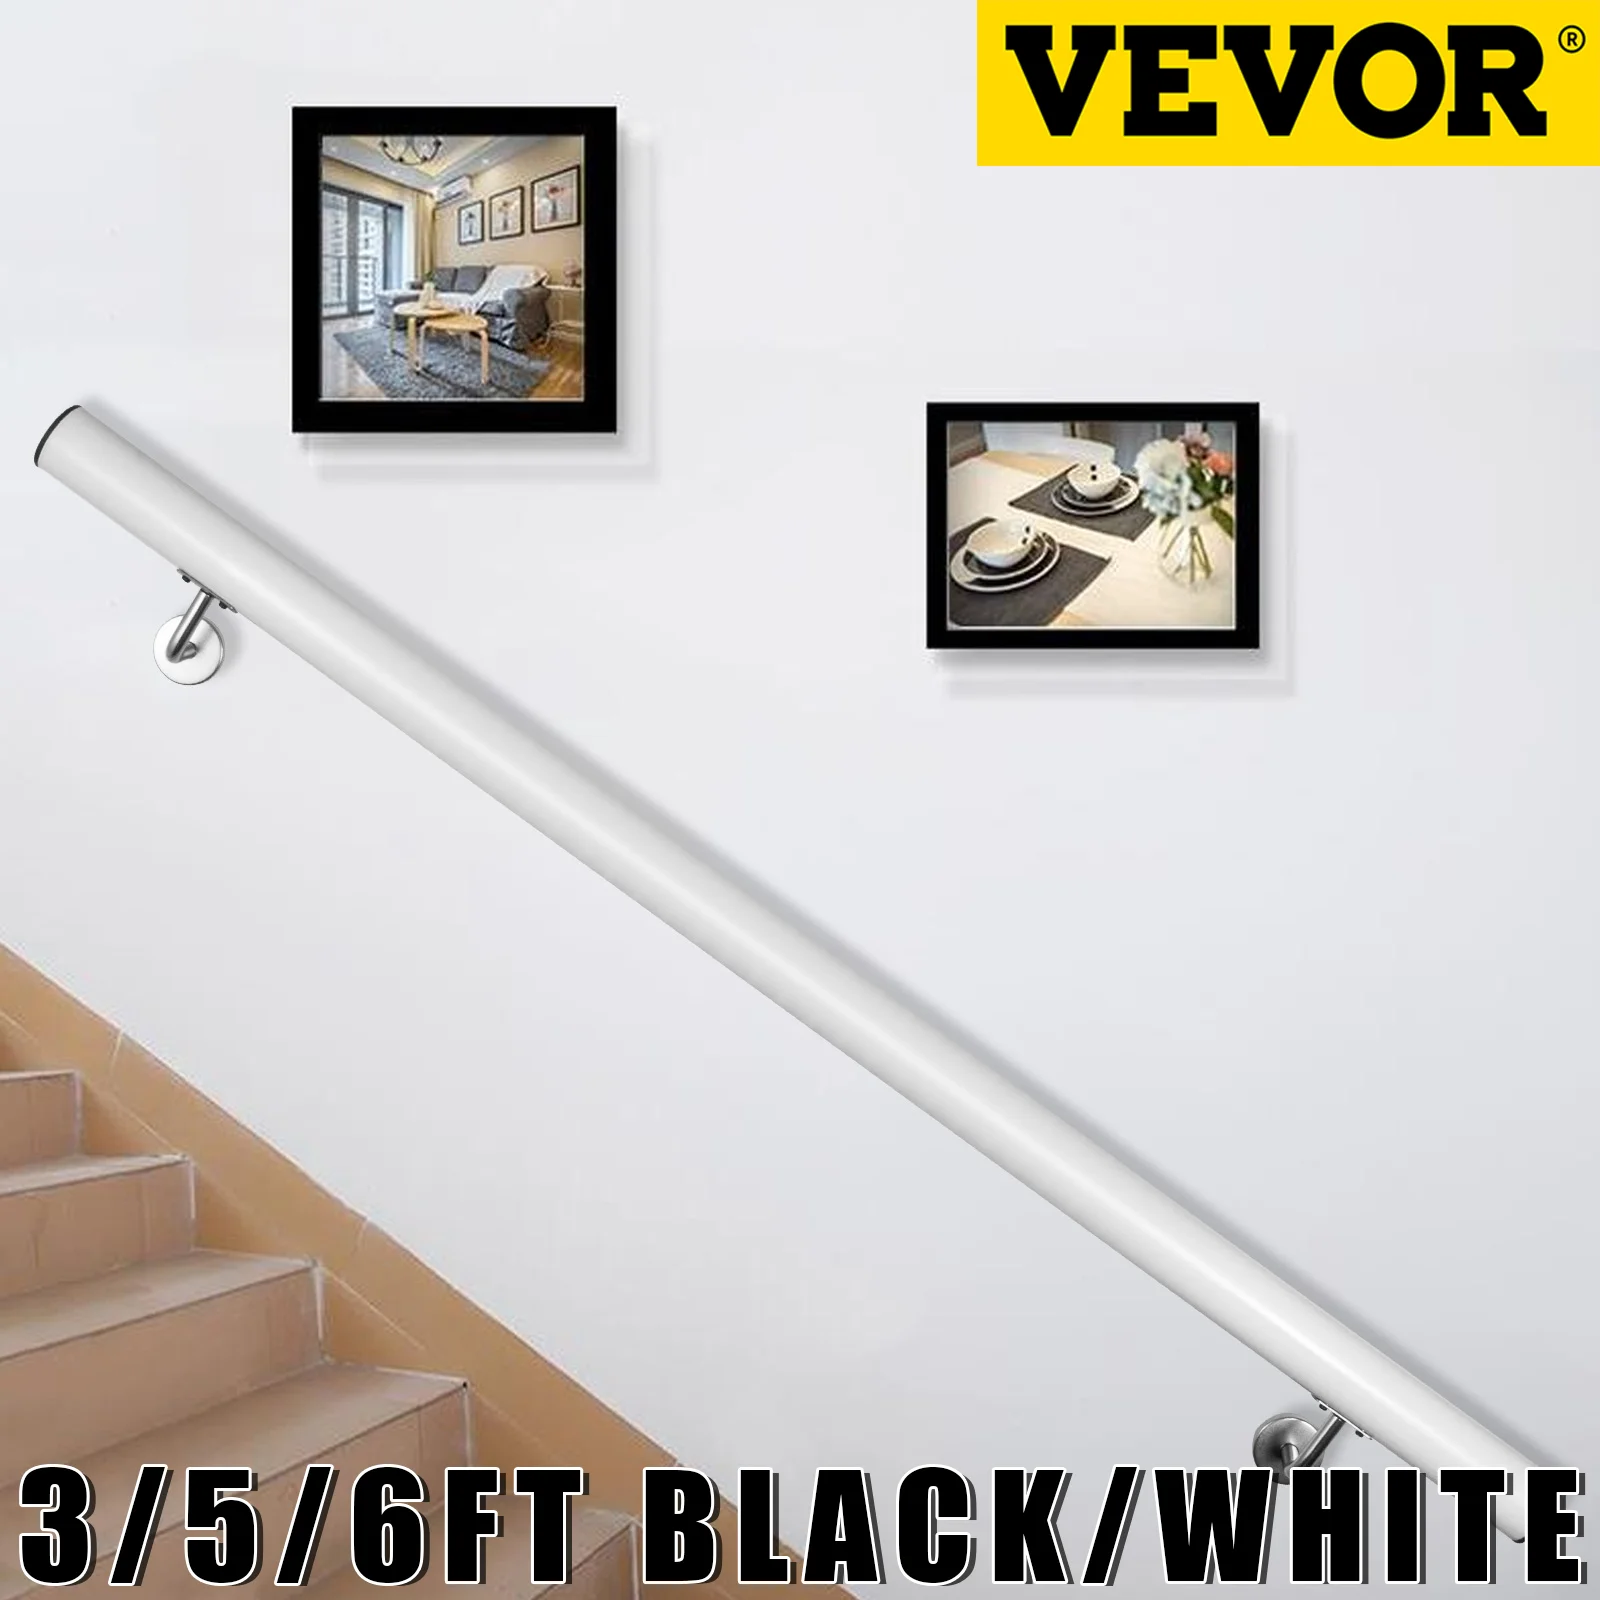 

VEVOR Stair Handrail 3/5/6ft Length Stair Rail Aluminum Modern Handrails For Stairs 200lbs Load Capacity Stairway Railing Round